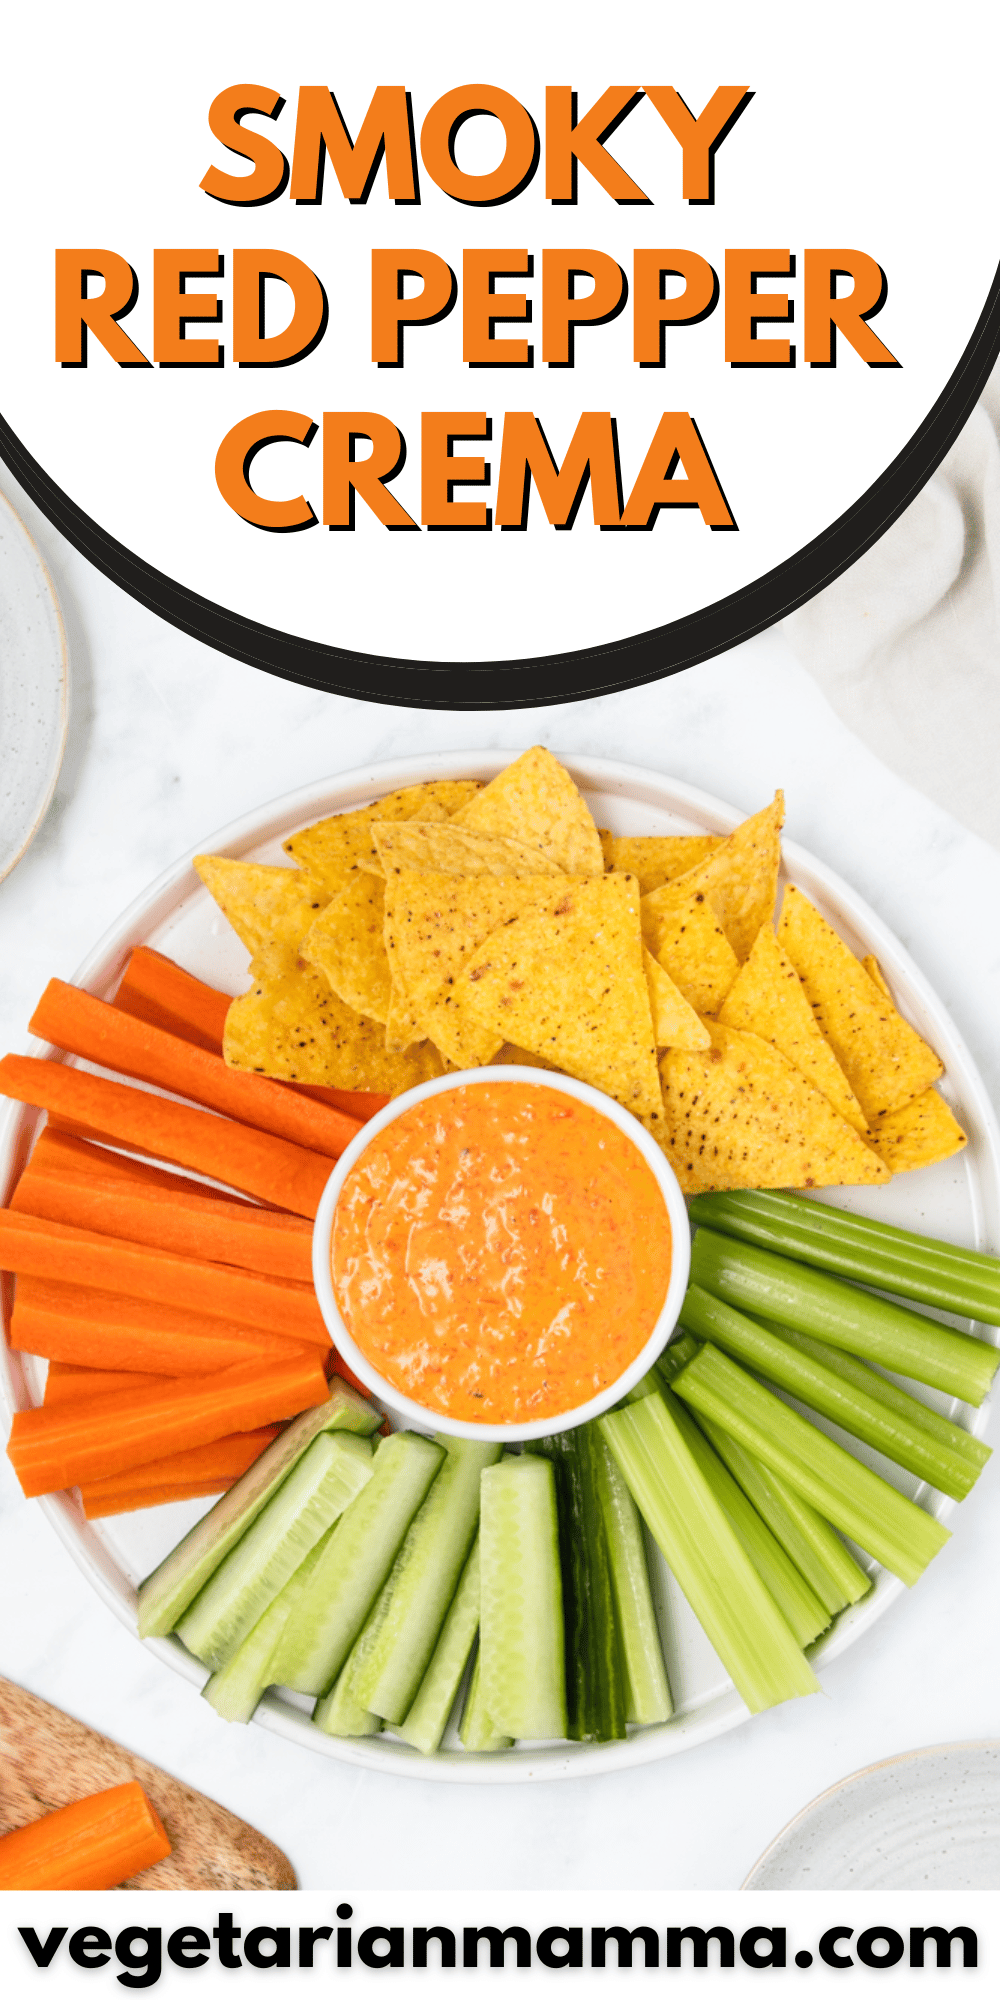 Smoky Red Pepper Crema is a rich and creamy, versatile sauce that fits in perfectly with all of your favorite dishes!